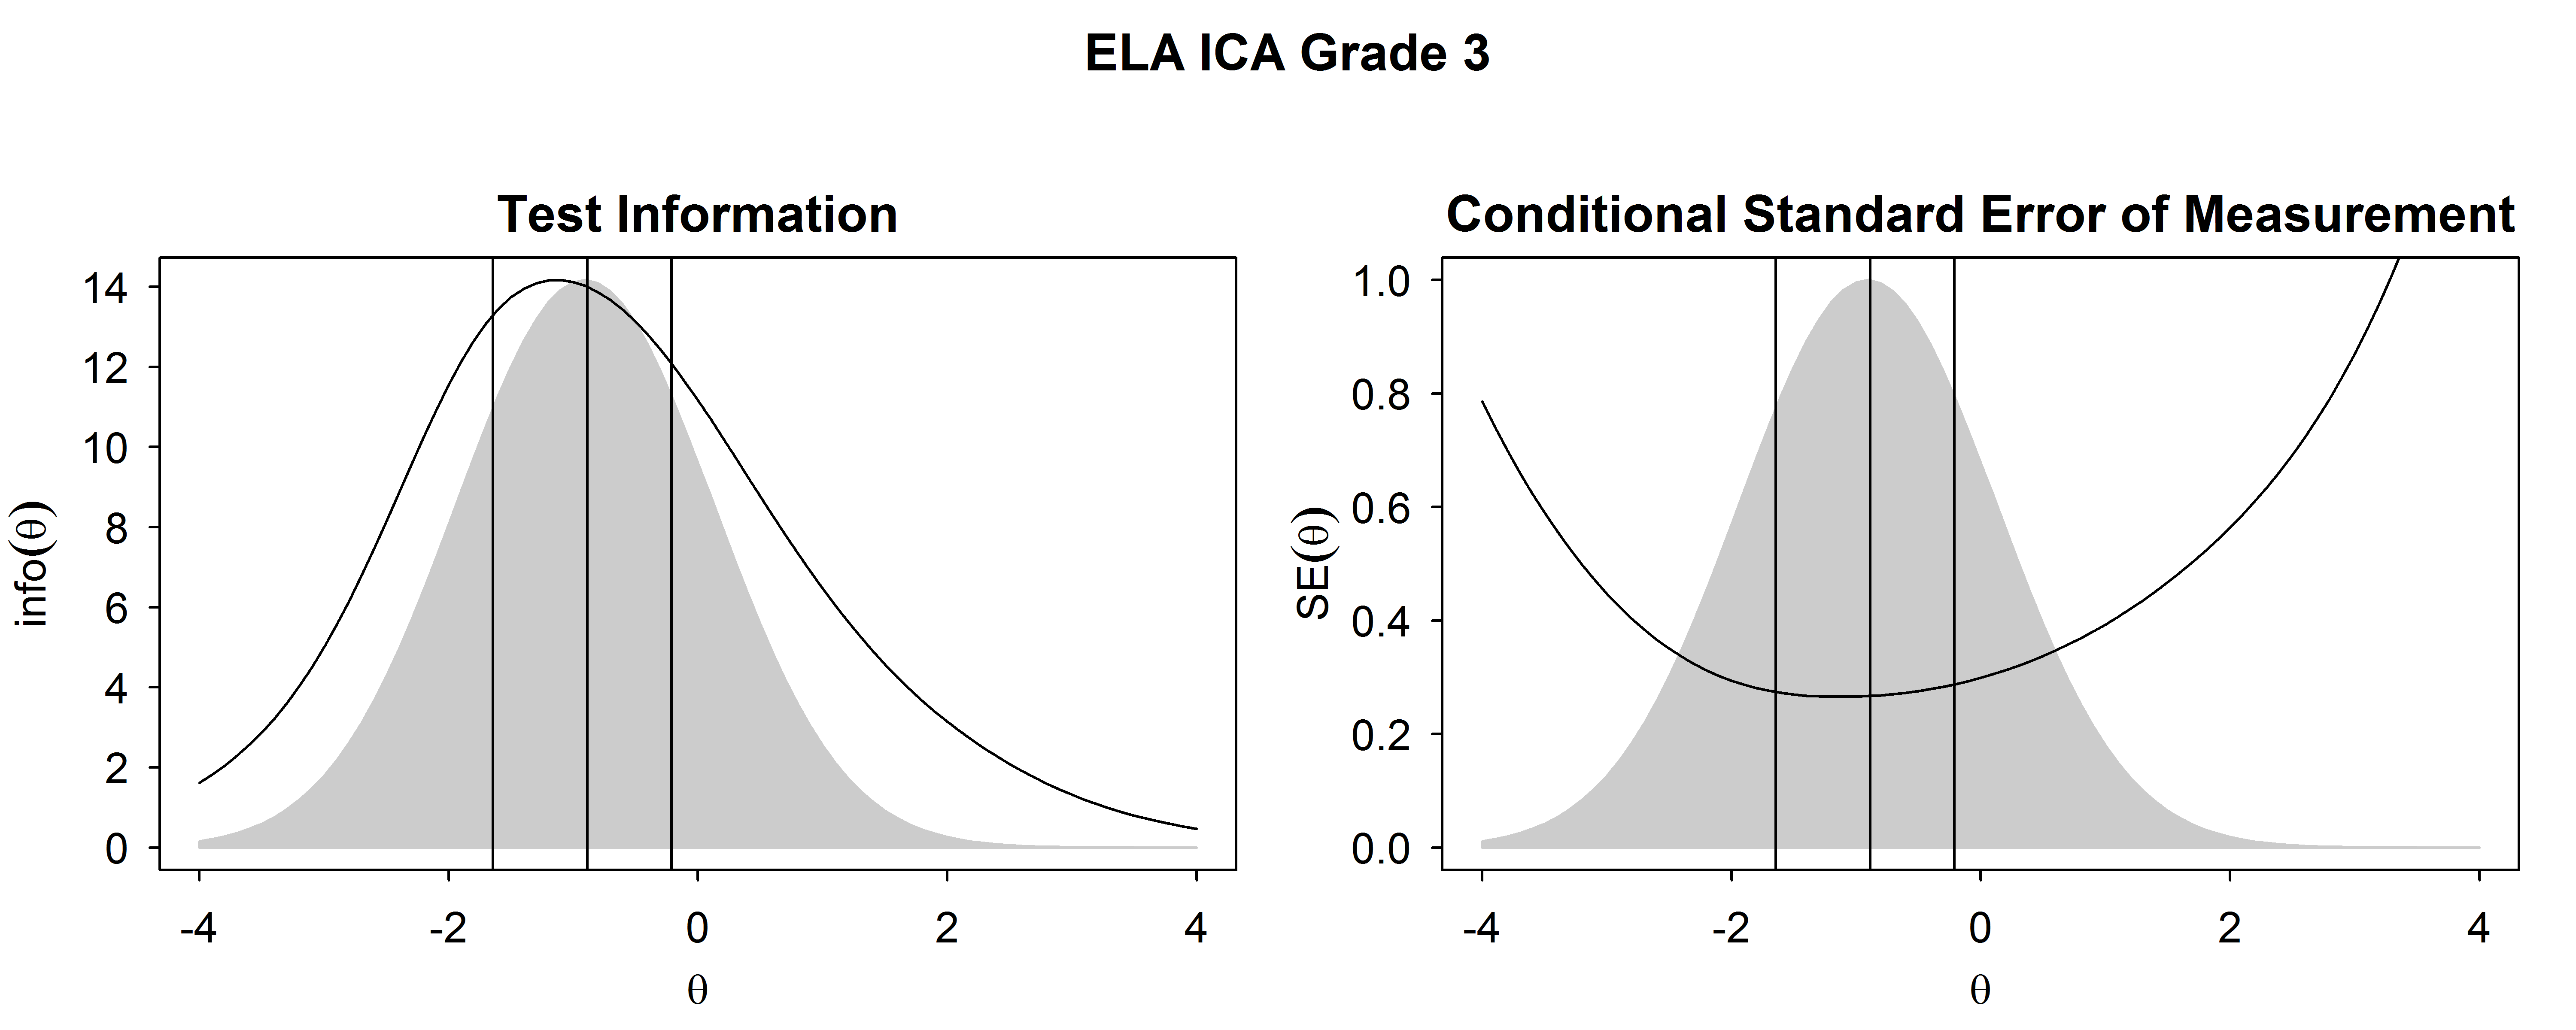 Test Information Functions and SEM For ELA/Literacy ICA, Grade 3